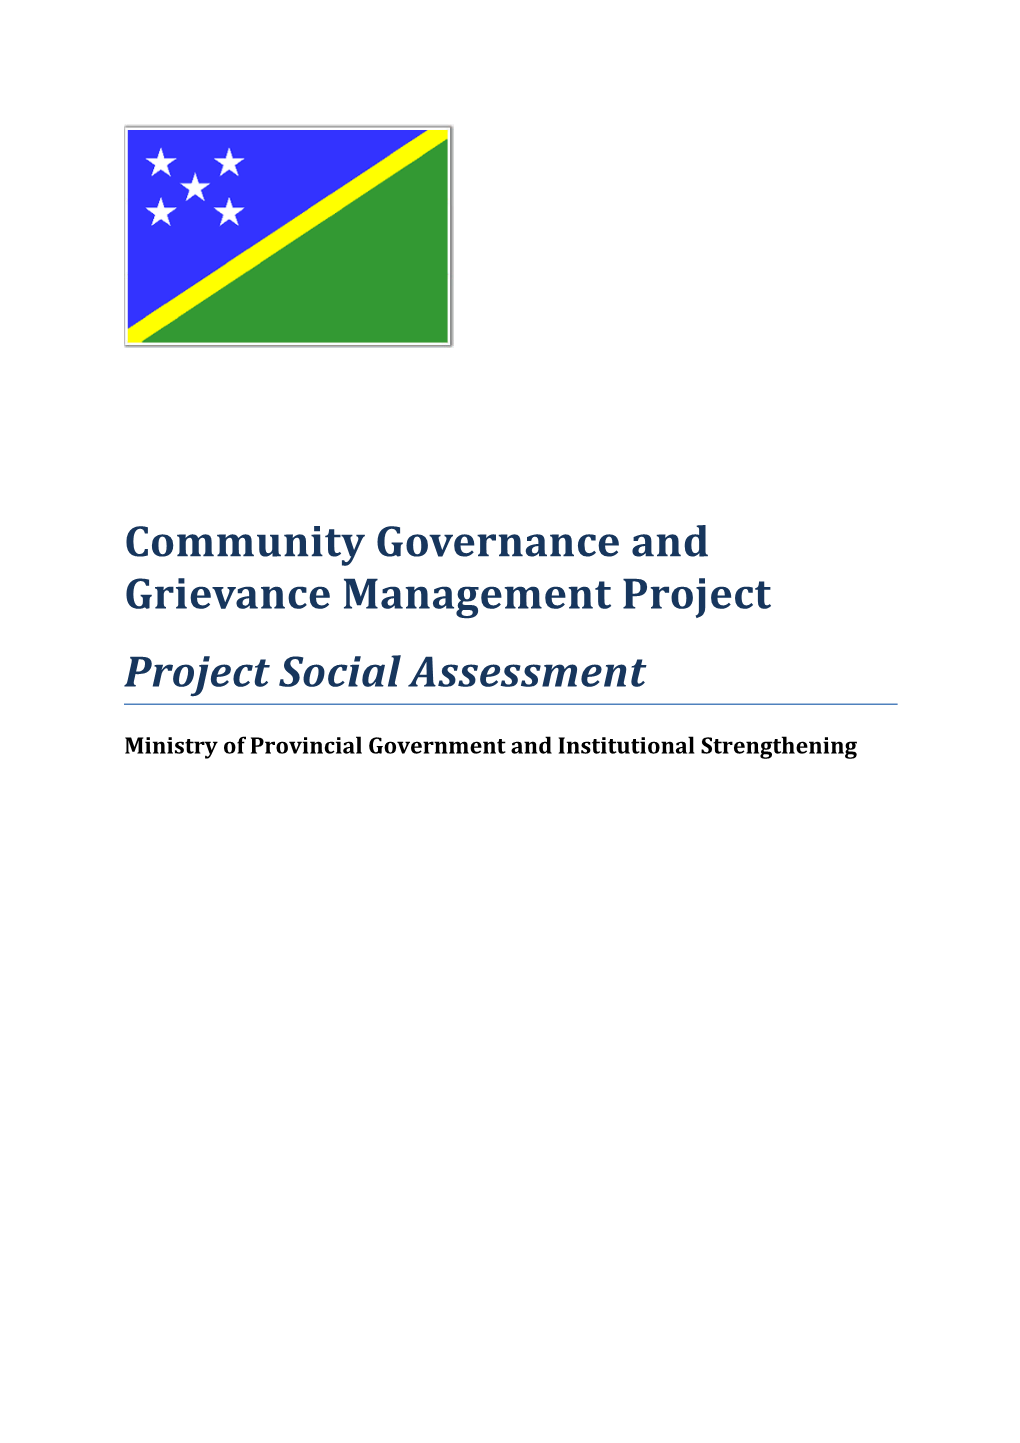 Community Governance and Grievance Management Project